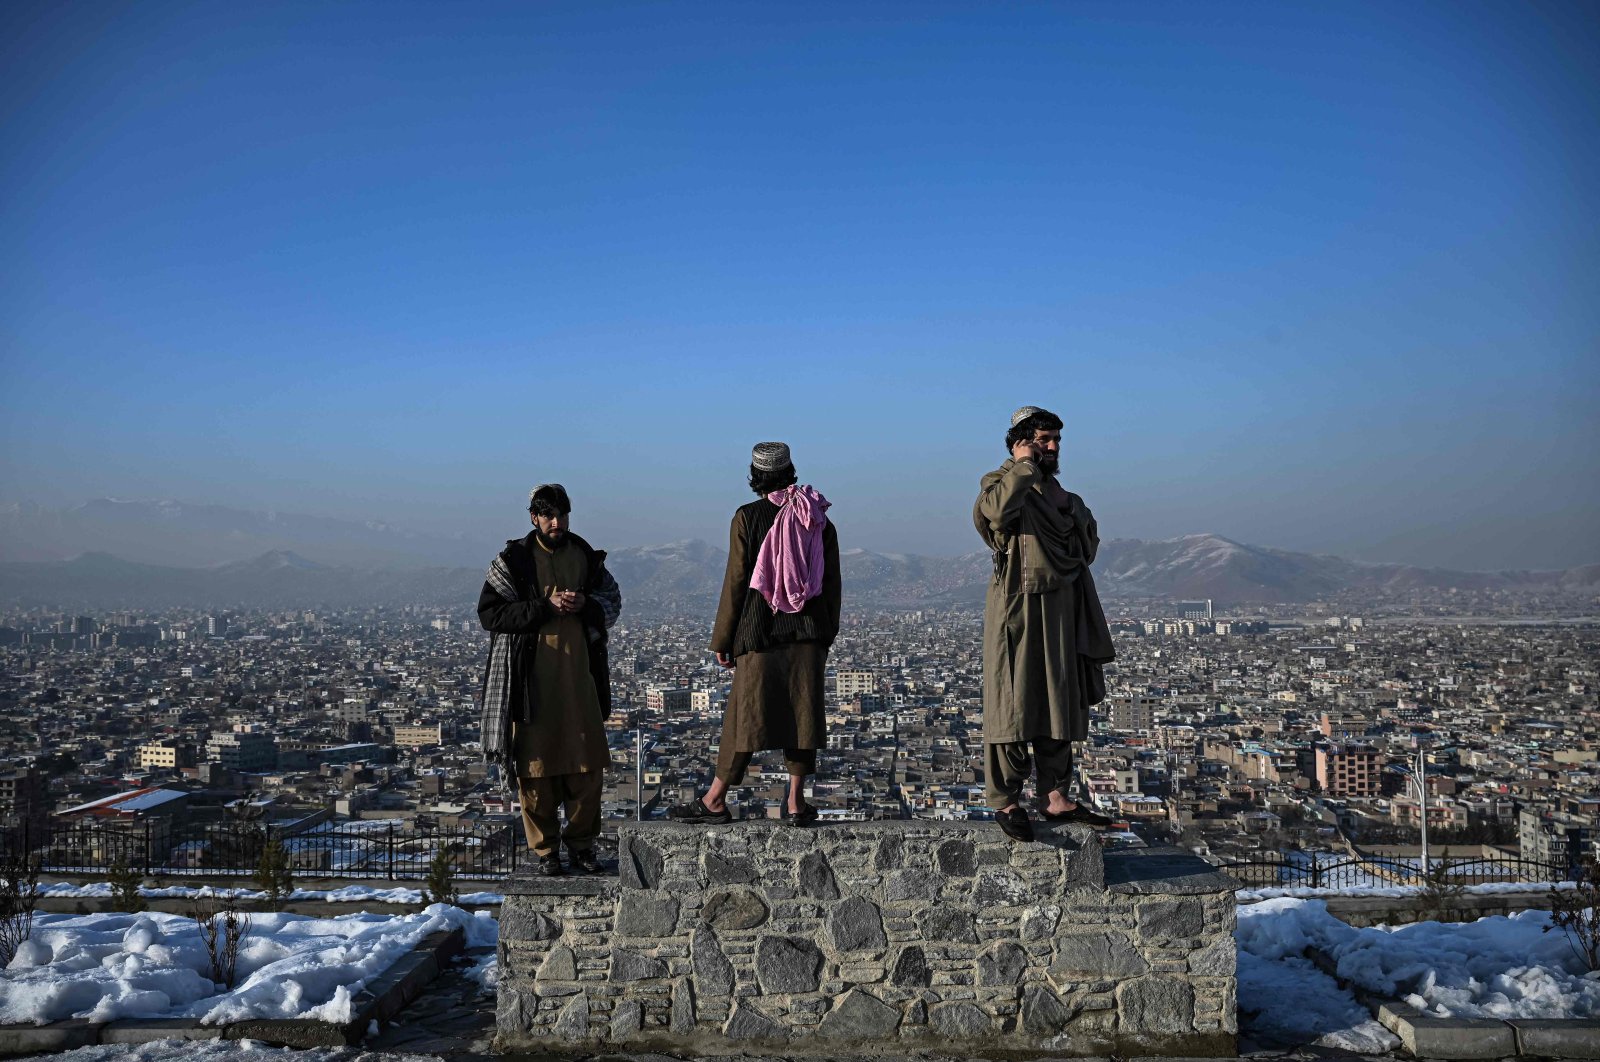 Members of the Taliban stand over a plinth overlooking Kabul city at the Wazir Akbar Khan hill in Kabul, Afghanistan, Jan. 10, 2022. (AFP Photo)